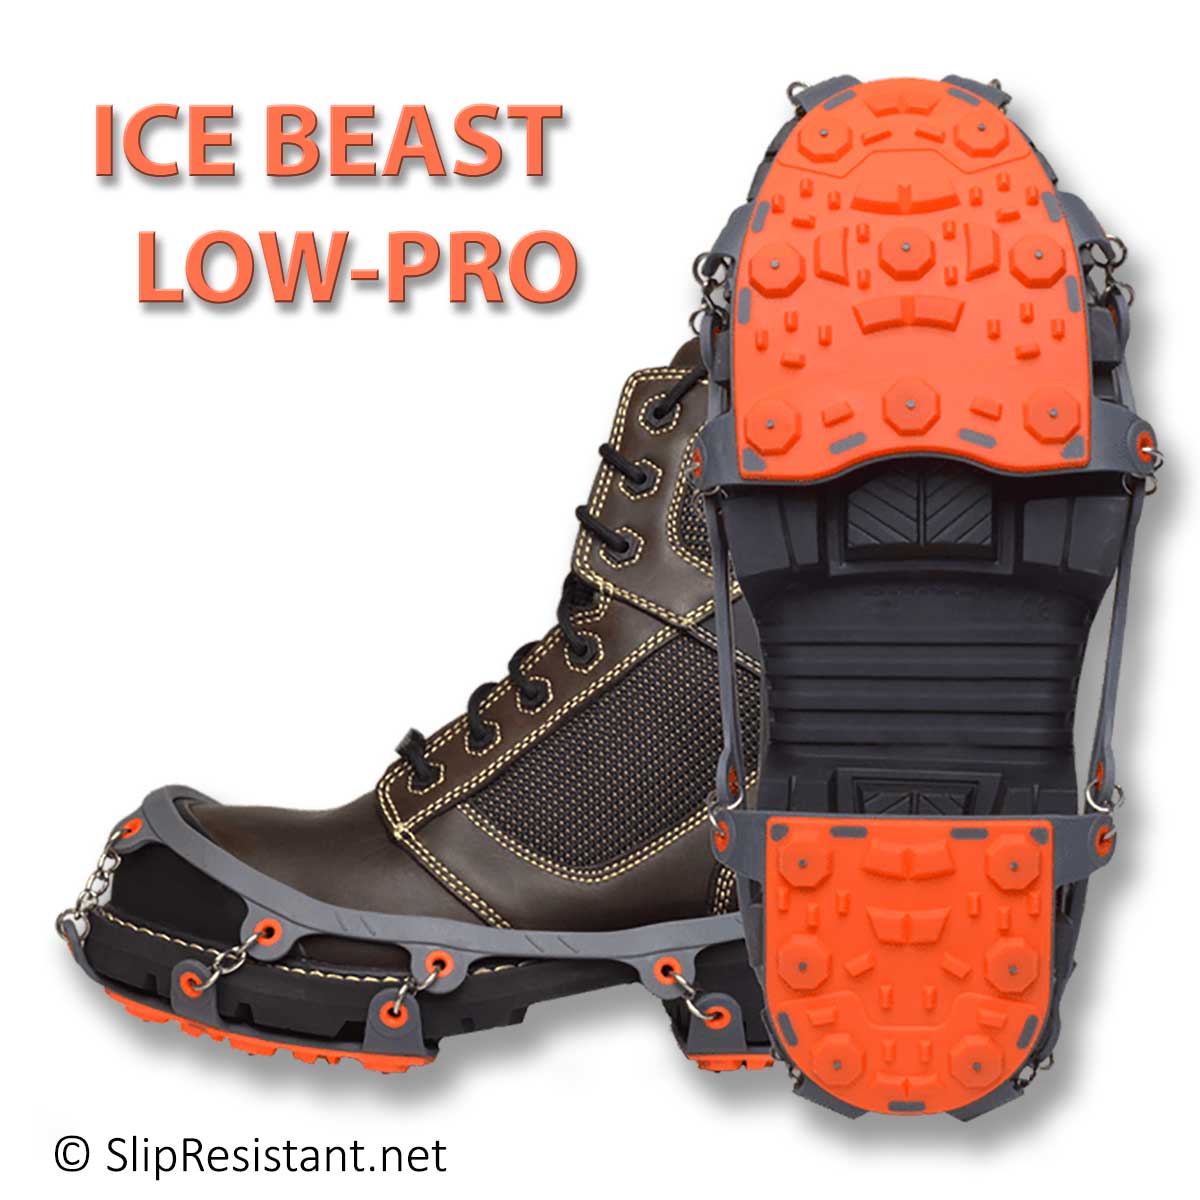 Winter Walking ICE BEAST LOW-PRO Ice Cleats for Boots